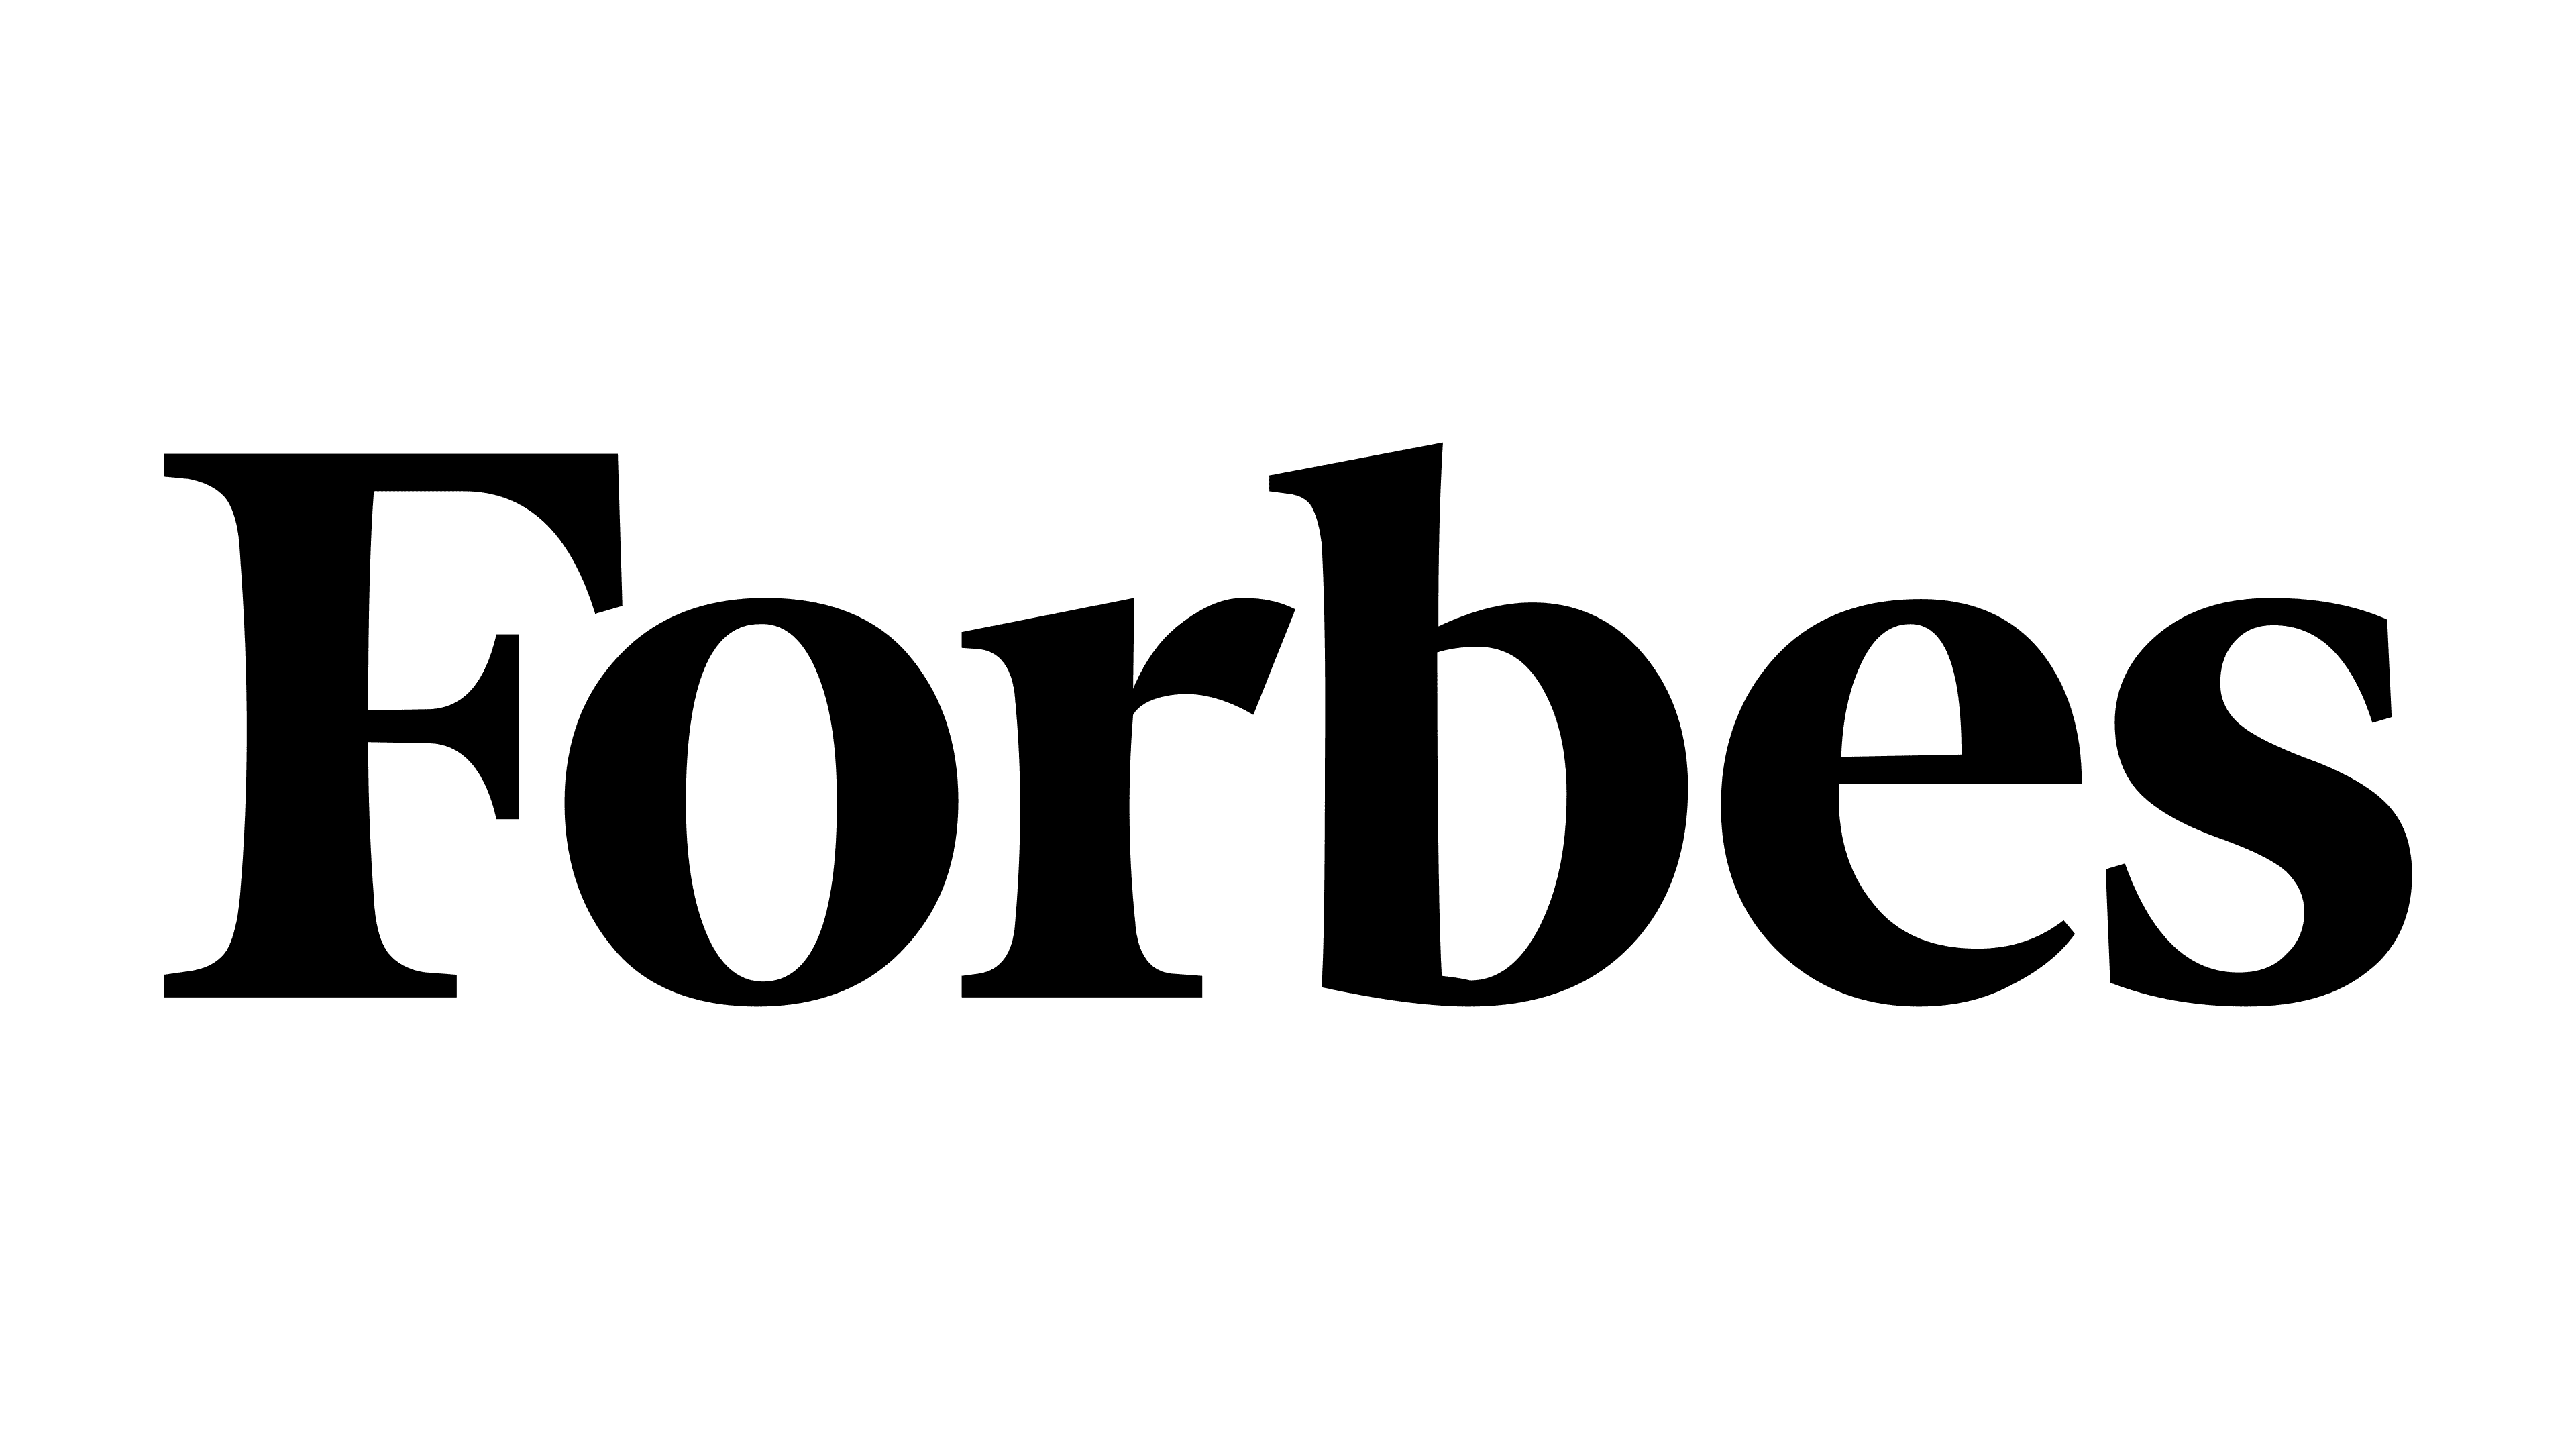 North Star Destinations Forbes Article